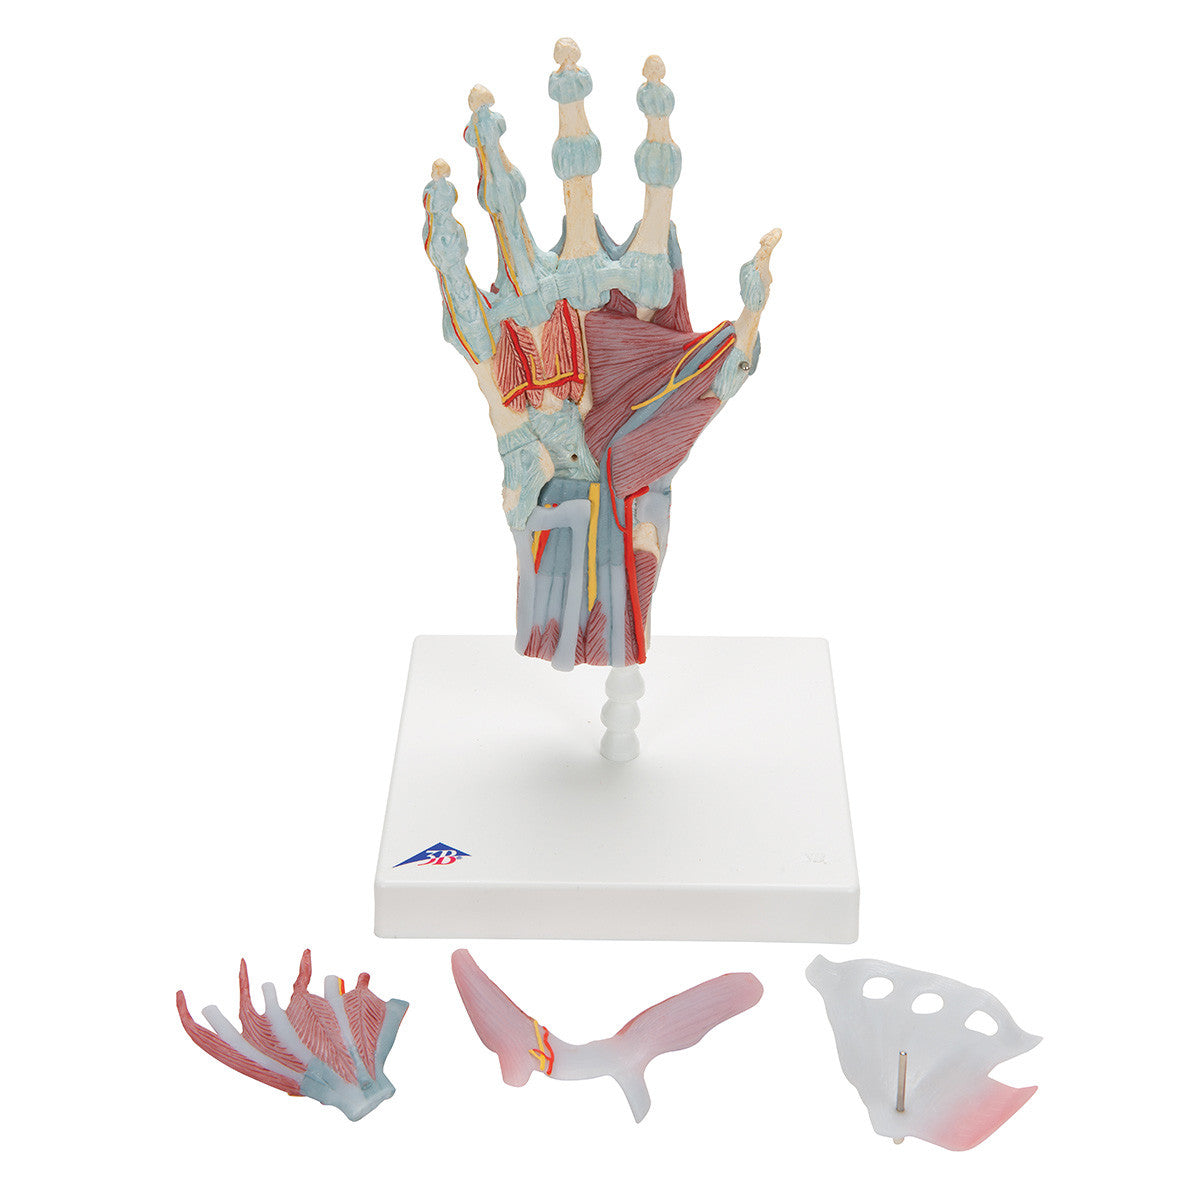 Hand Skeleton Model with Ligaments and Muscles - dissected